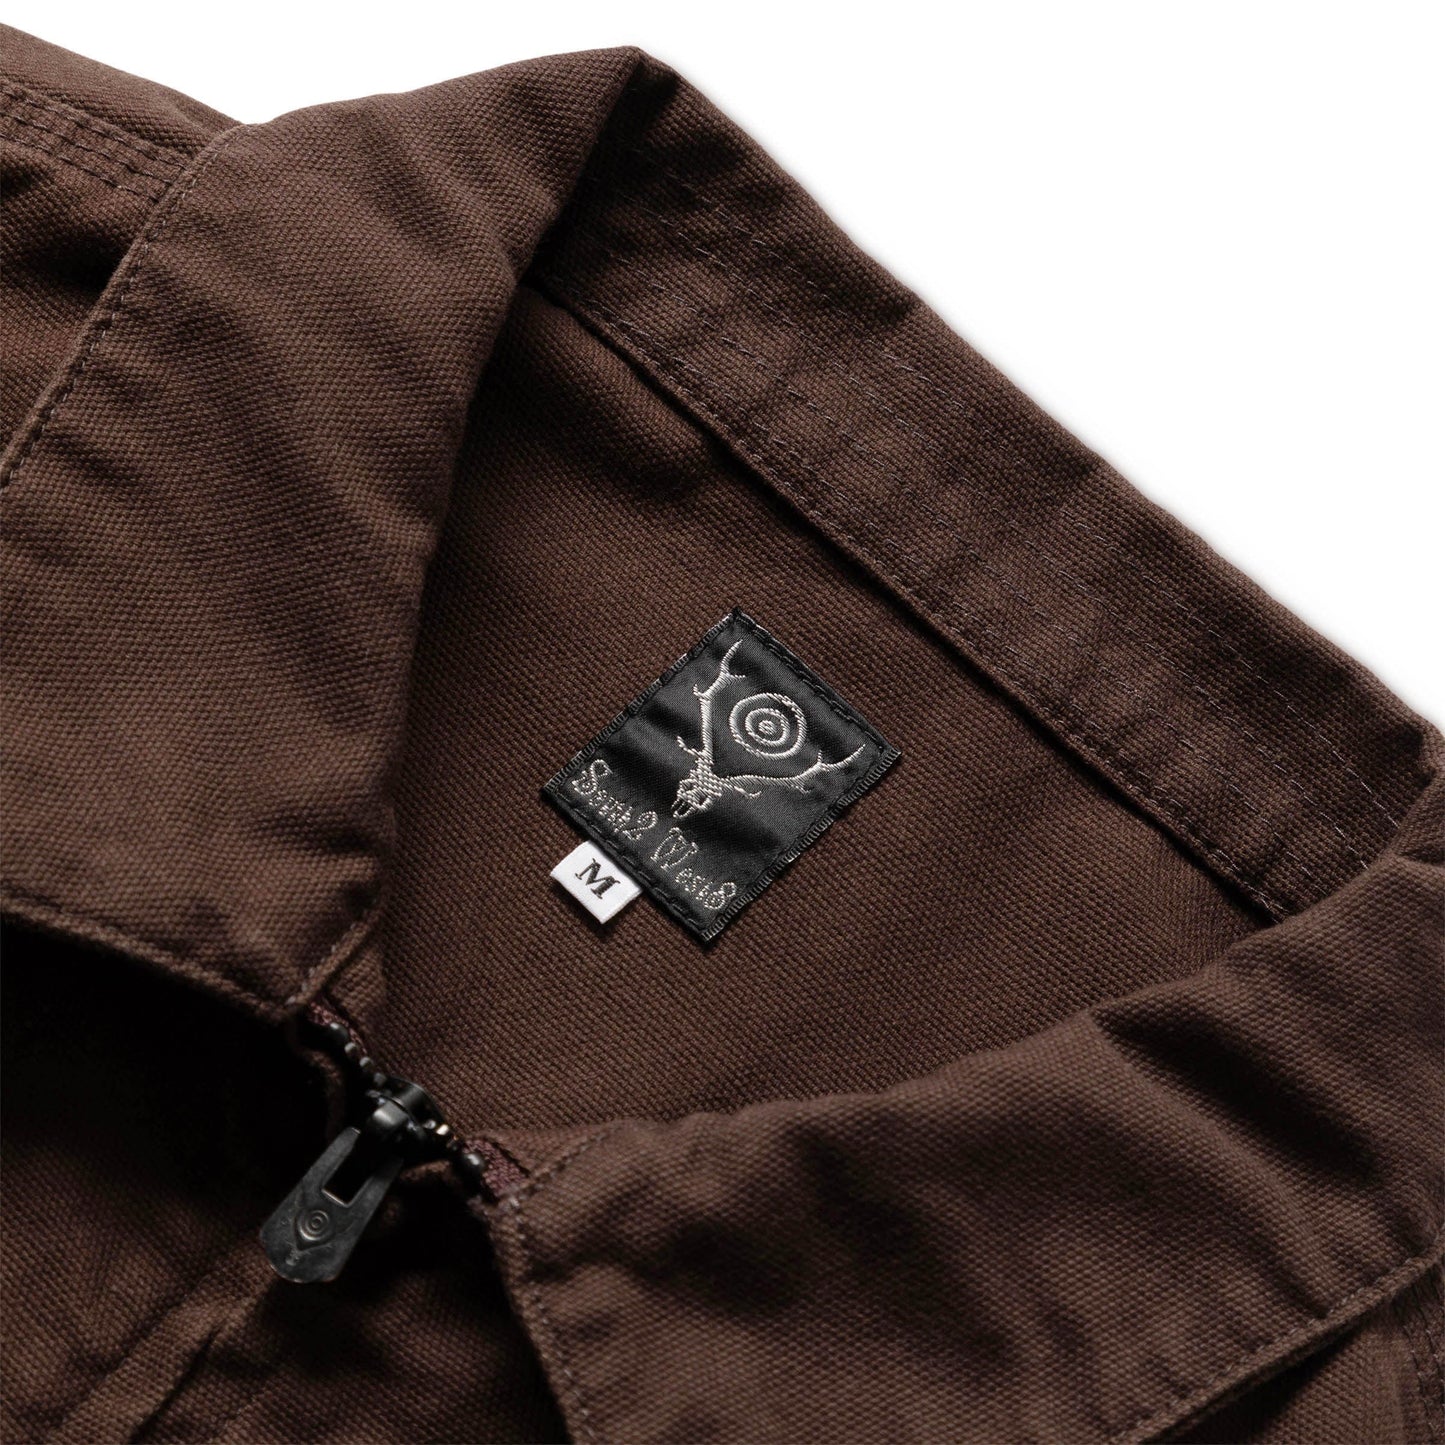 South2 West8 Outerwear WORK JACKET